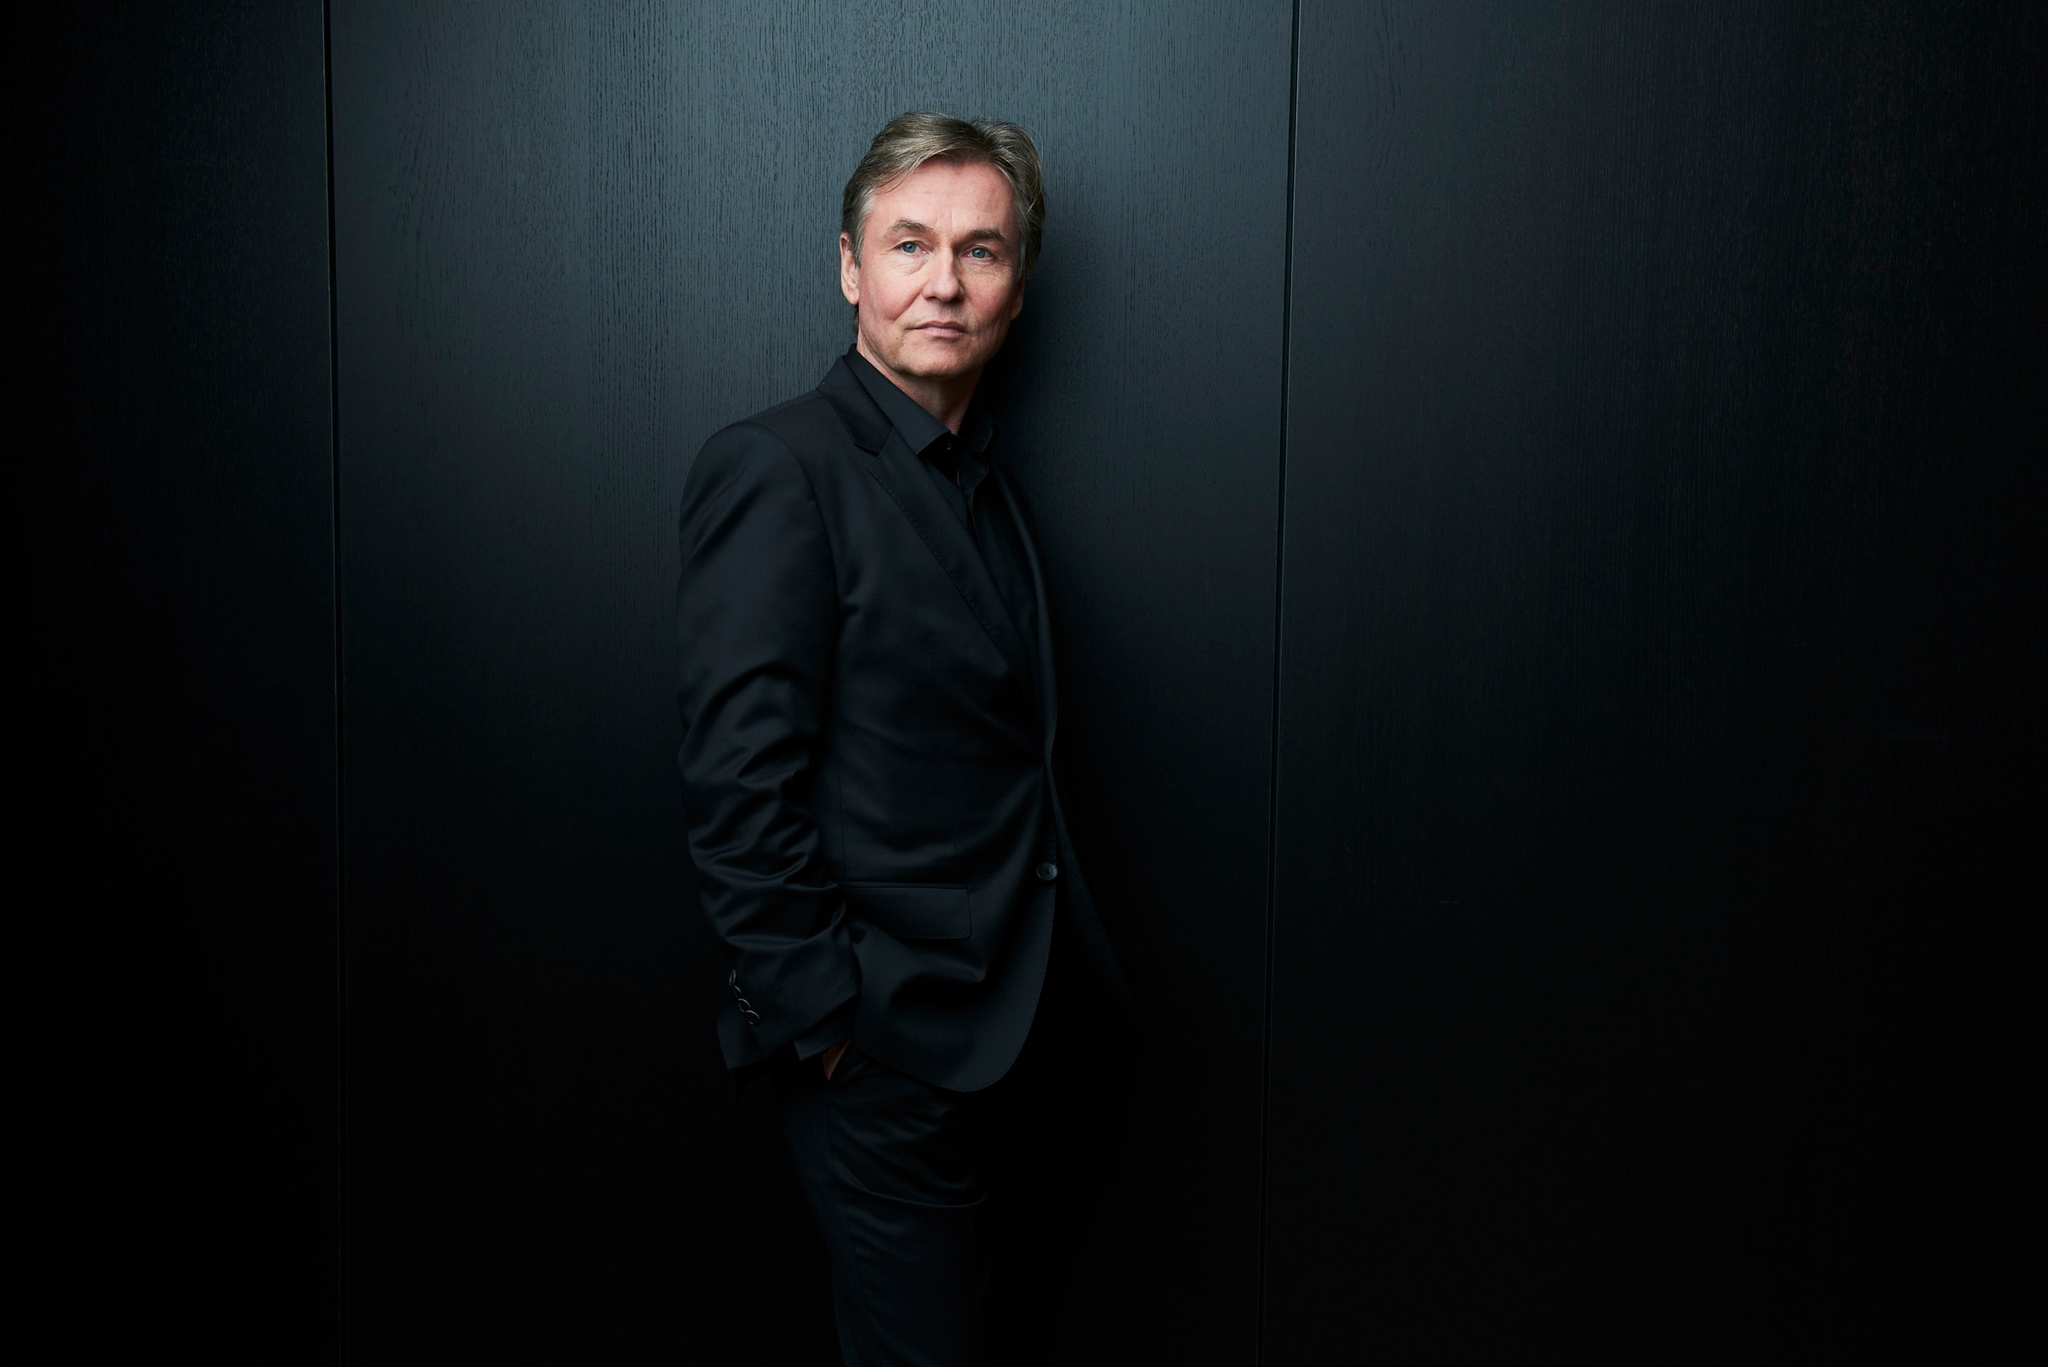 Conductor Esa-Pekka Salonen standing against a black background. He wears a black suit that blends into the shadowy background and his face and head are dramatically lit by a focused light.